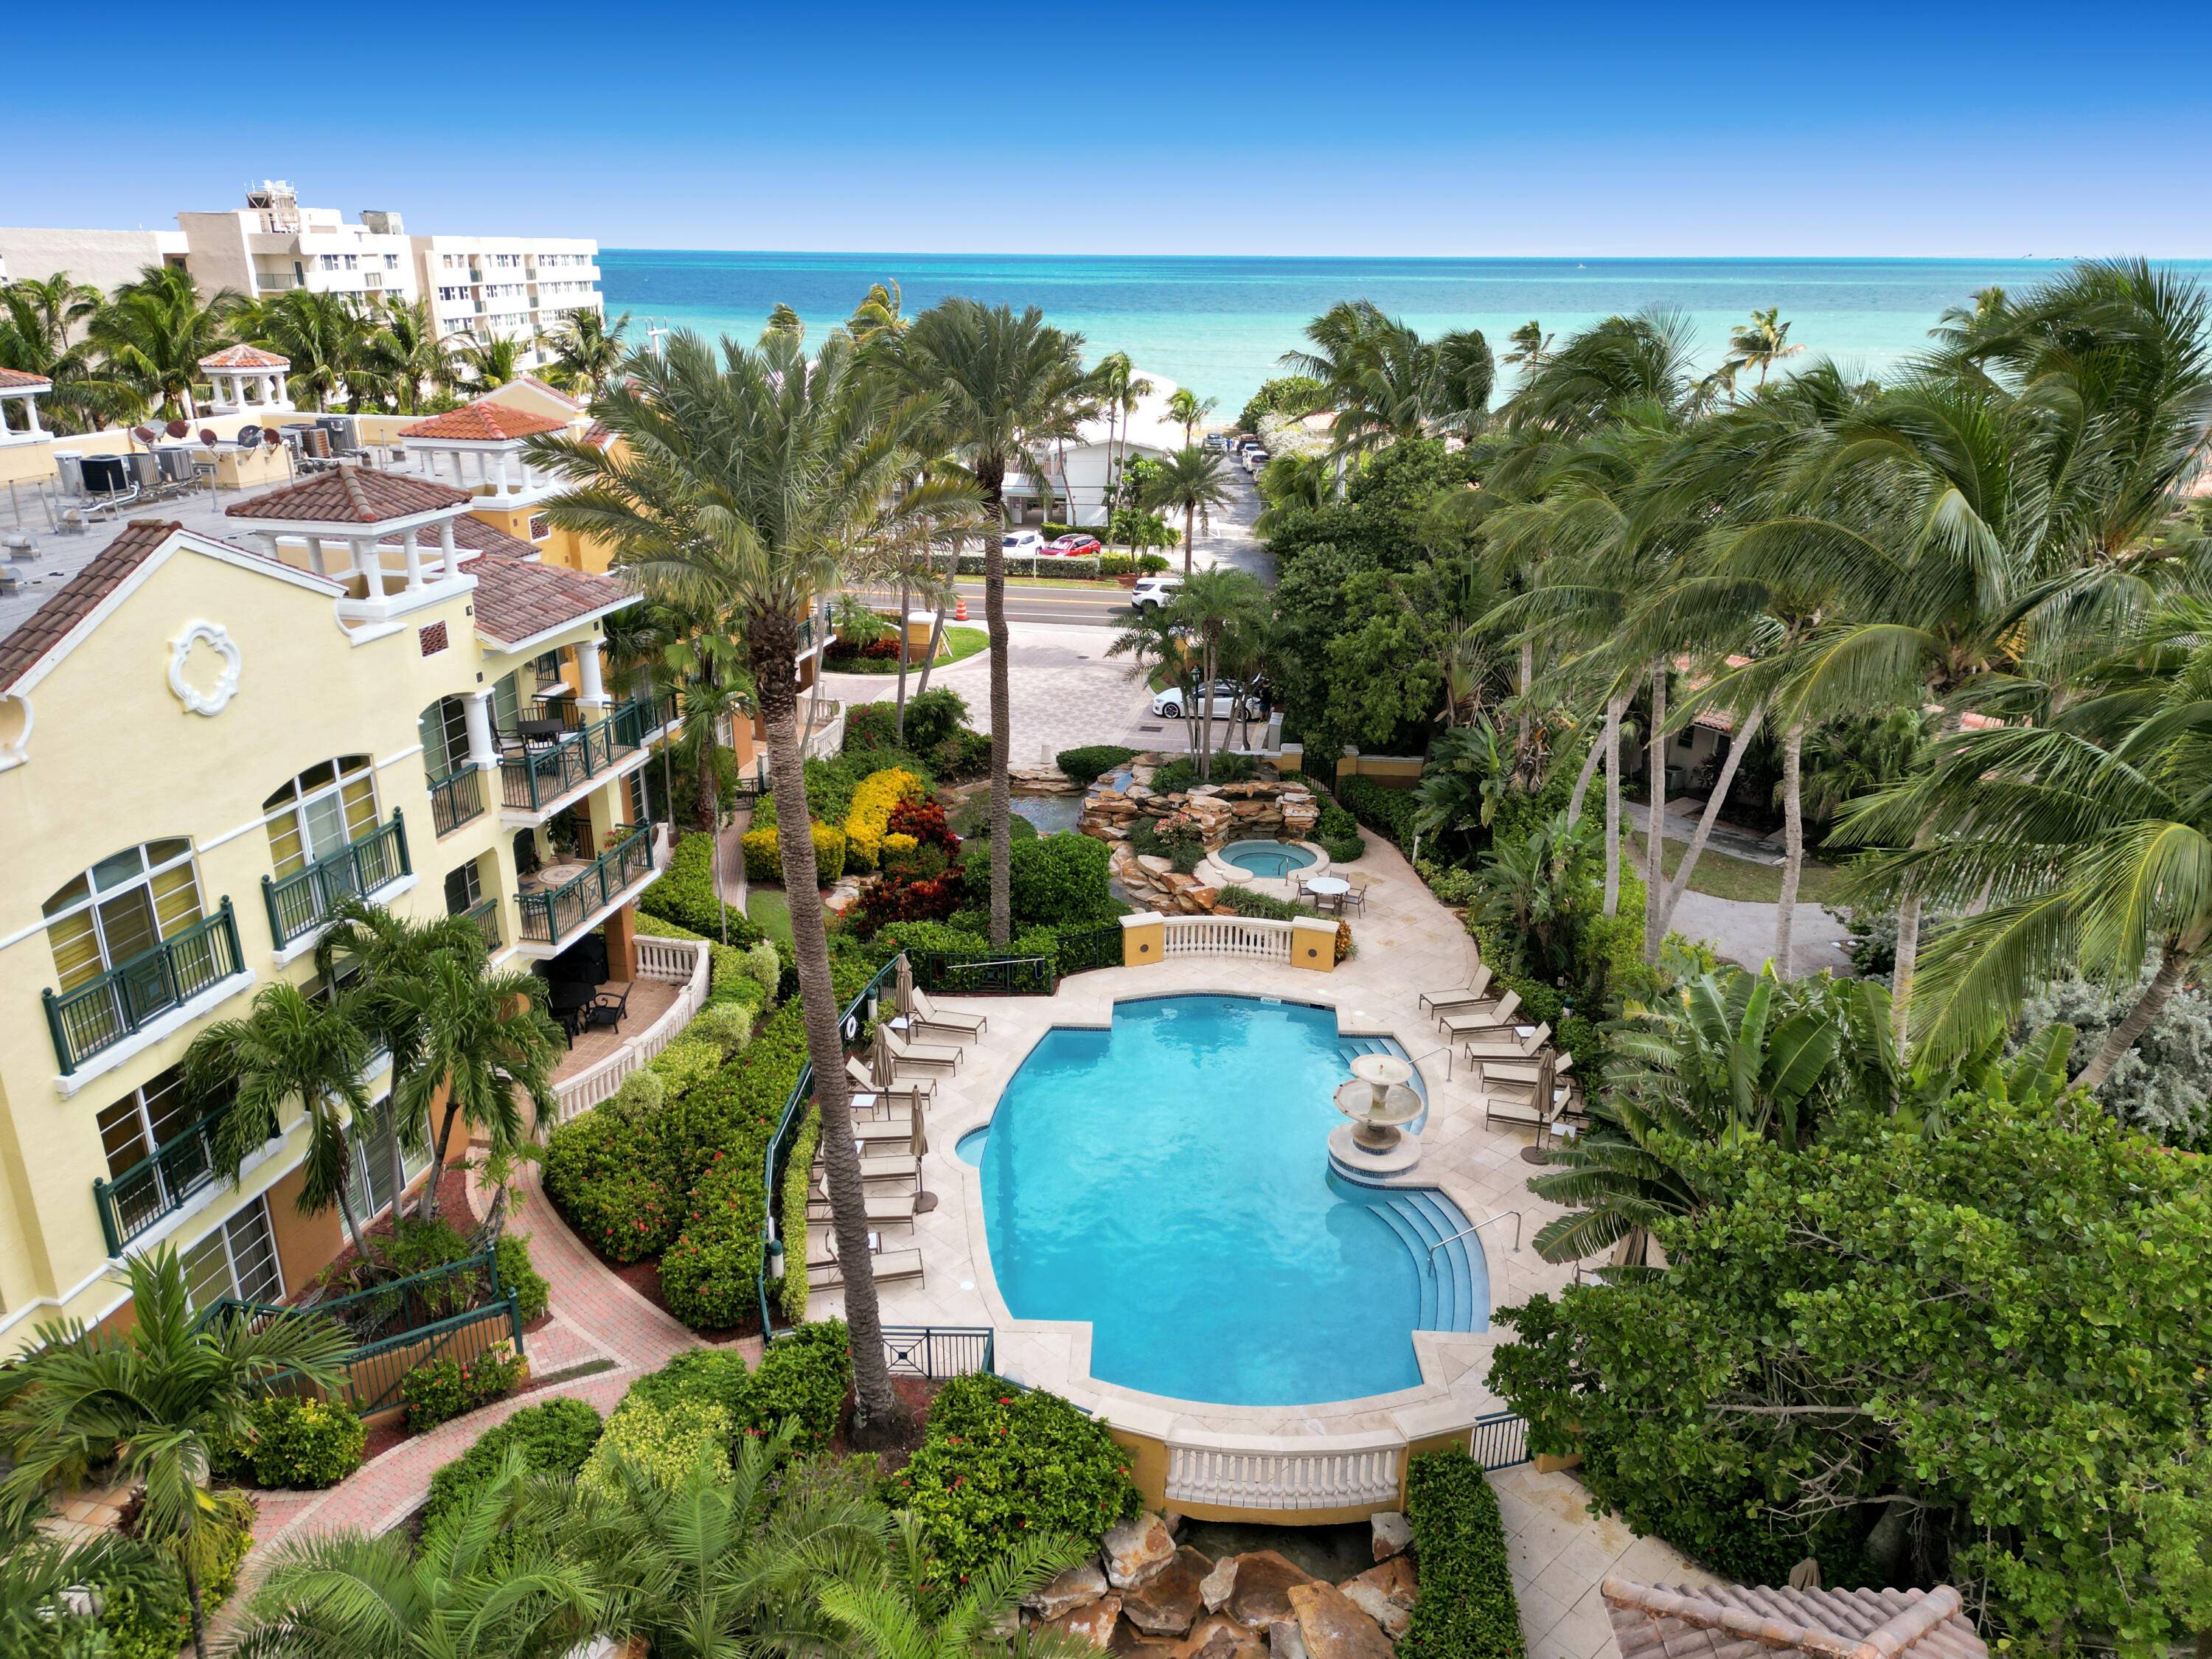 Gorgeous resort style living just steps to the ocean, Intracoastal and the fun restaurants and shops of downtown Deerfield Beach.